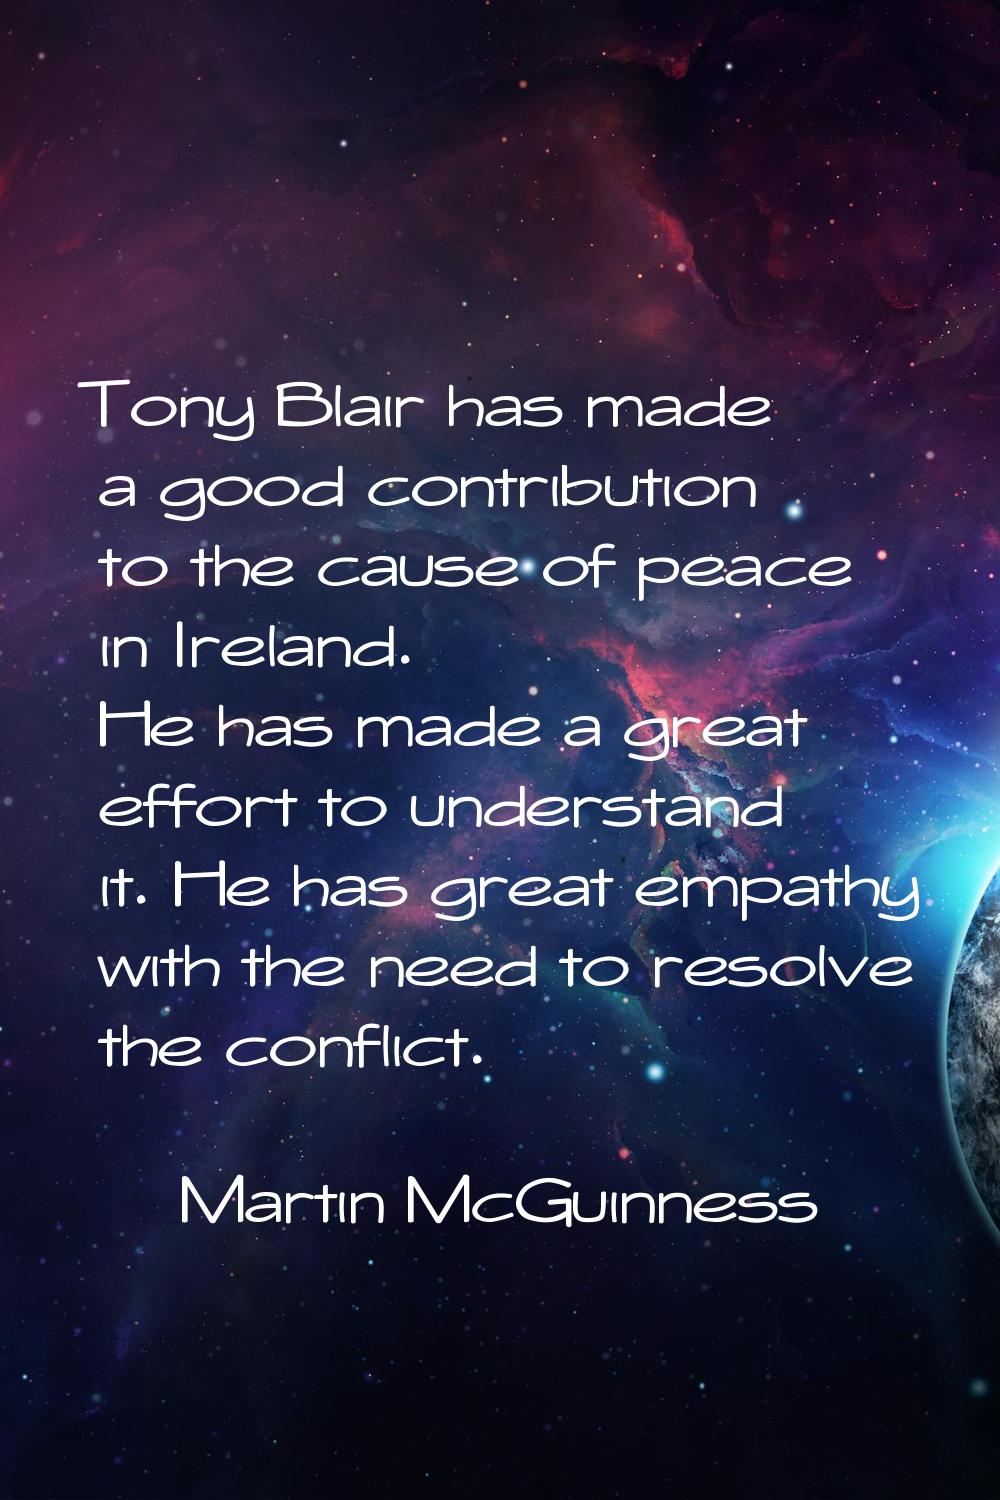 Tony Blair has made a good contribution to the cause of peace in Ireland. He has made a great effor